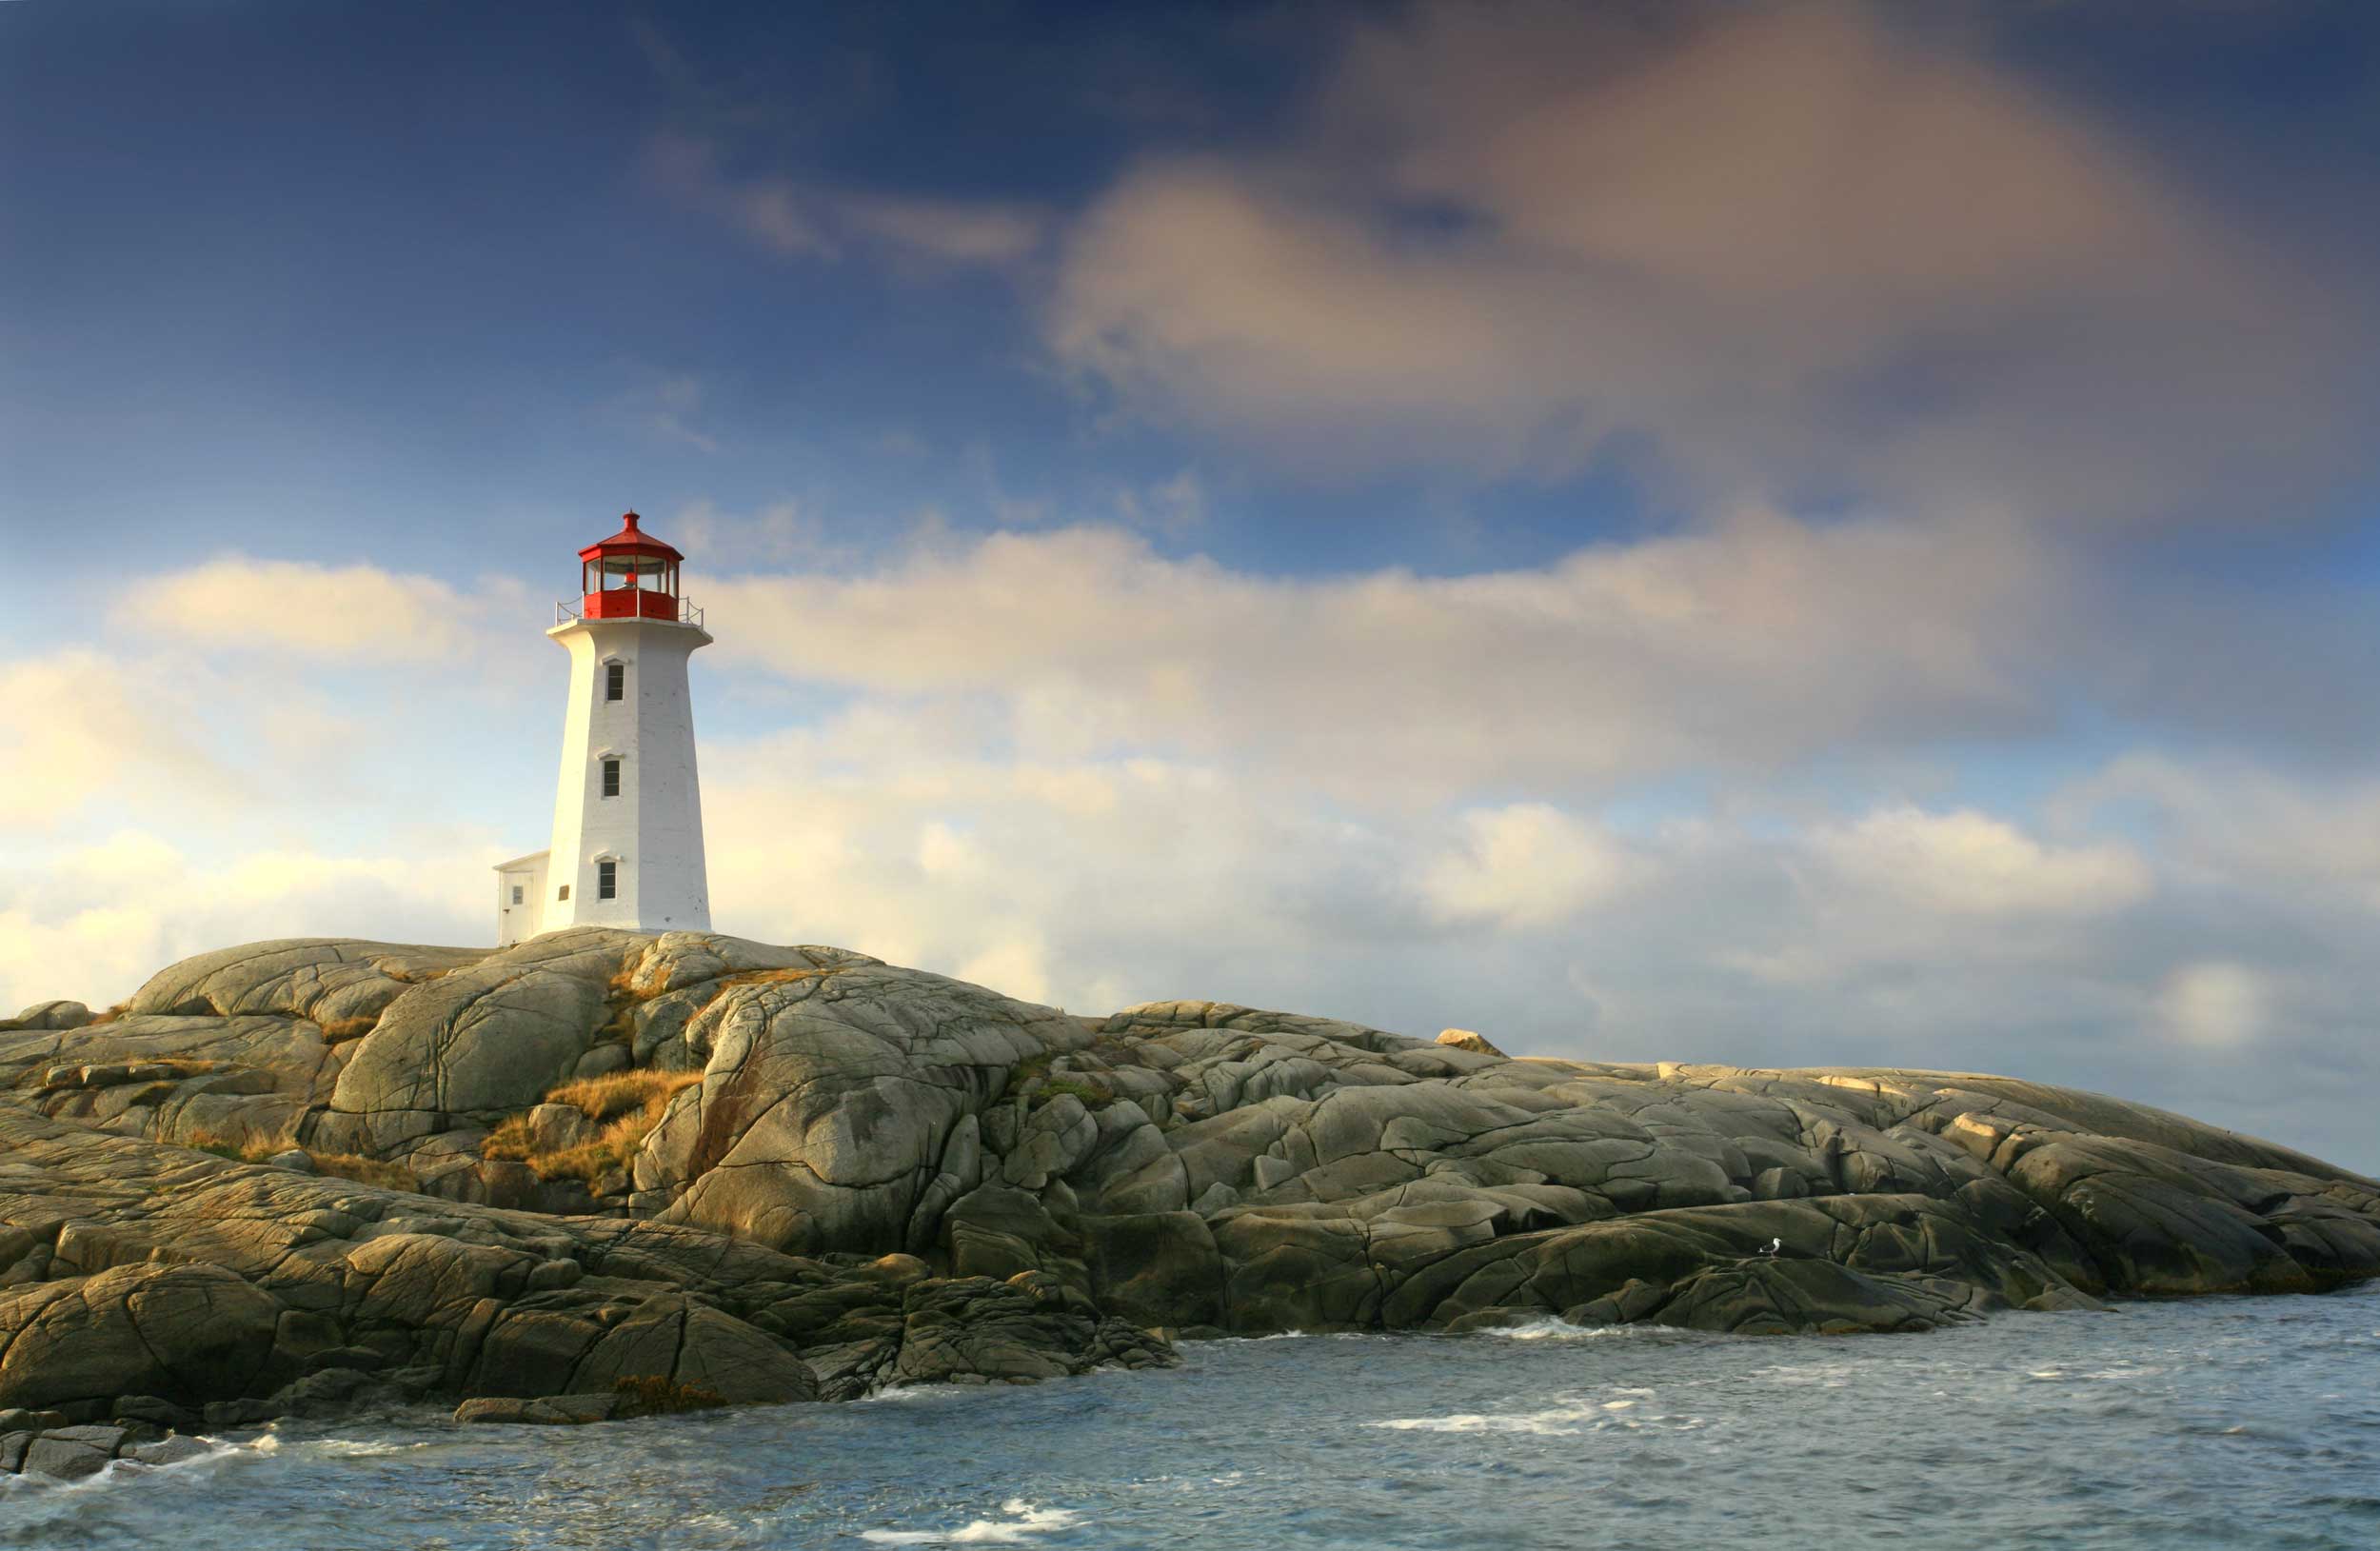 A white lighthouse with a red top set on a smooth-rock promontory, Peggy's Cove, Halifax